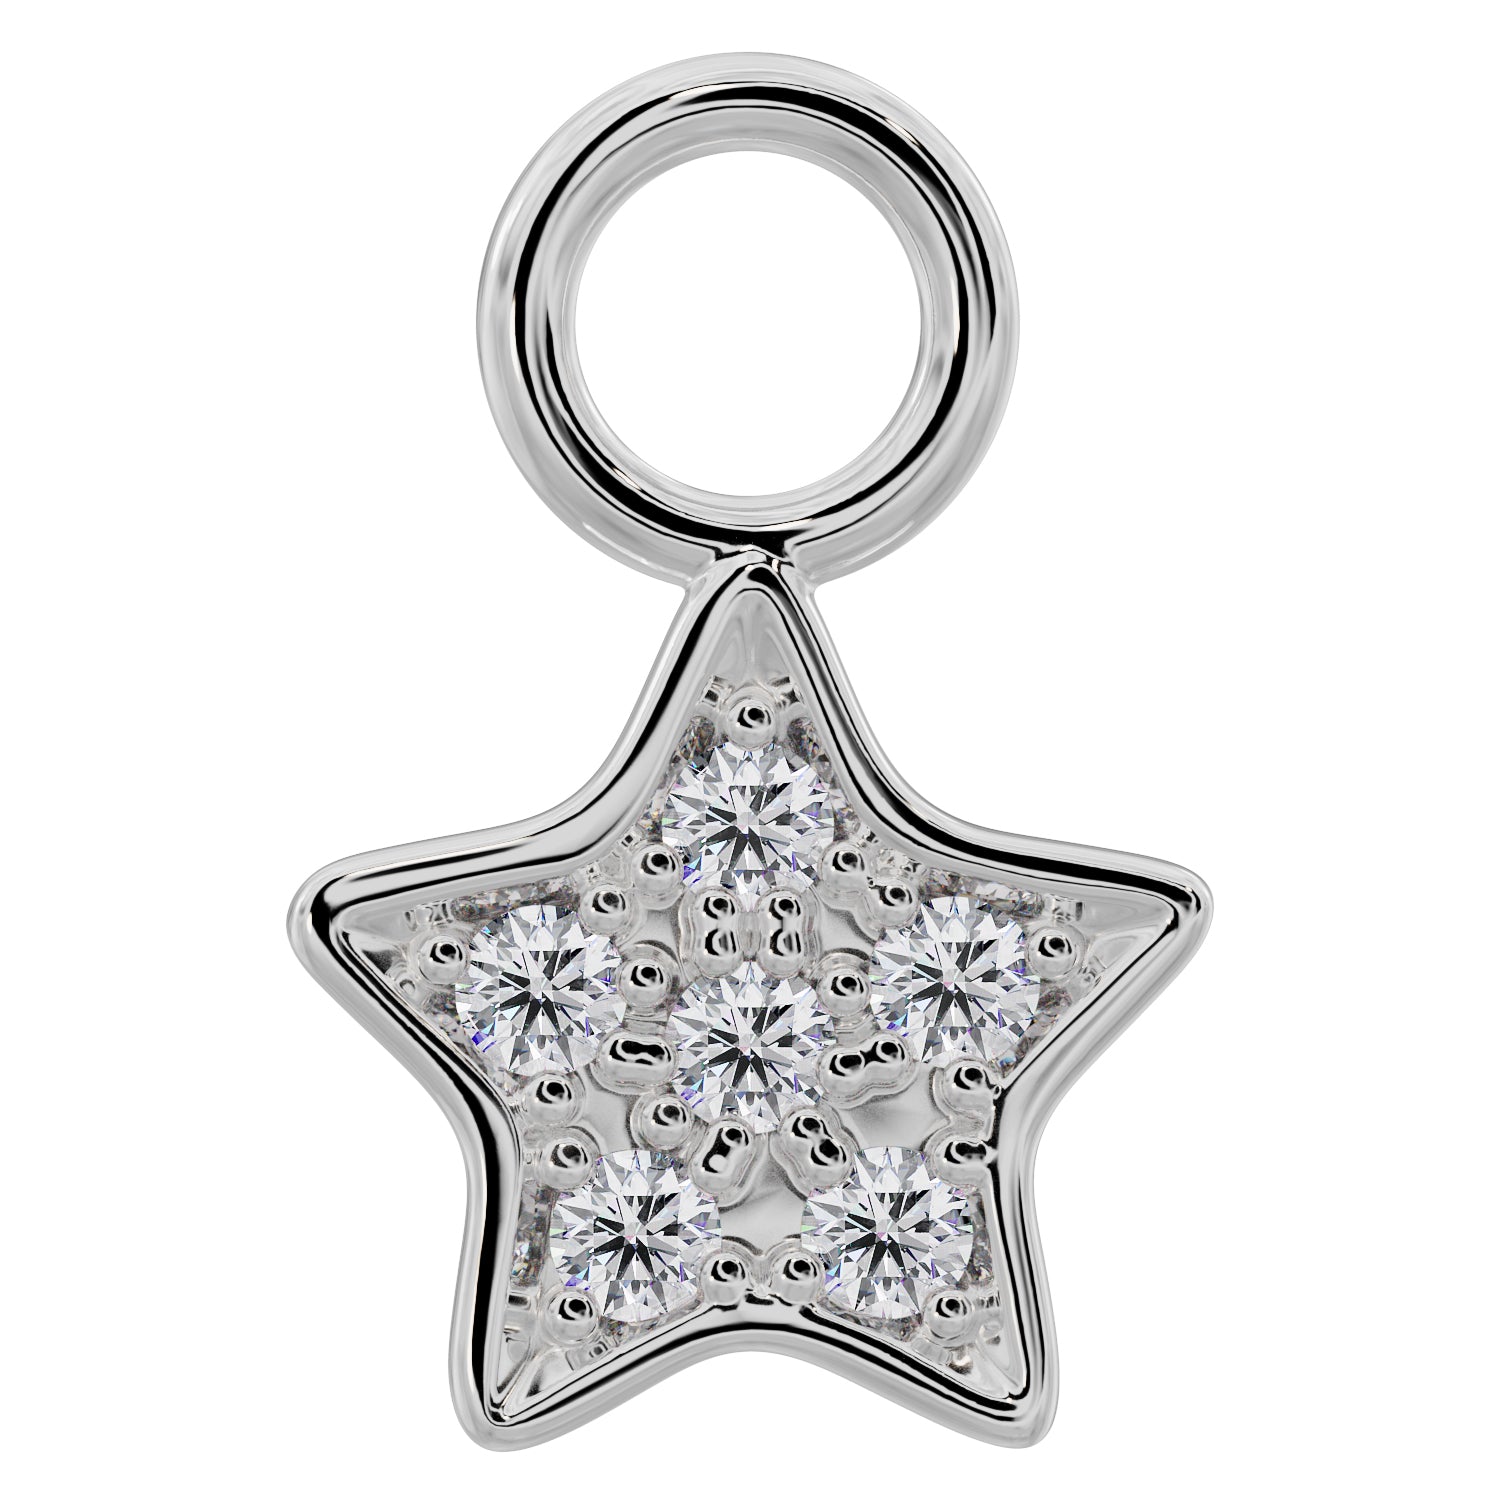 Star Diamond Pave Charm Accessory for Piercing Jewelry-14K White Gold